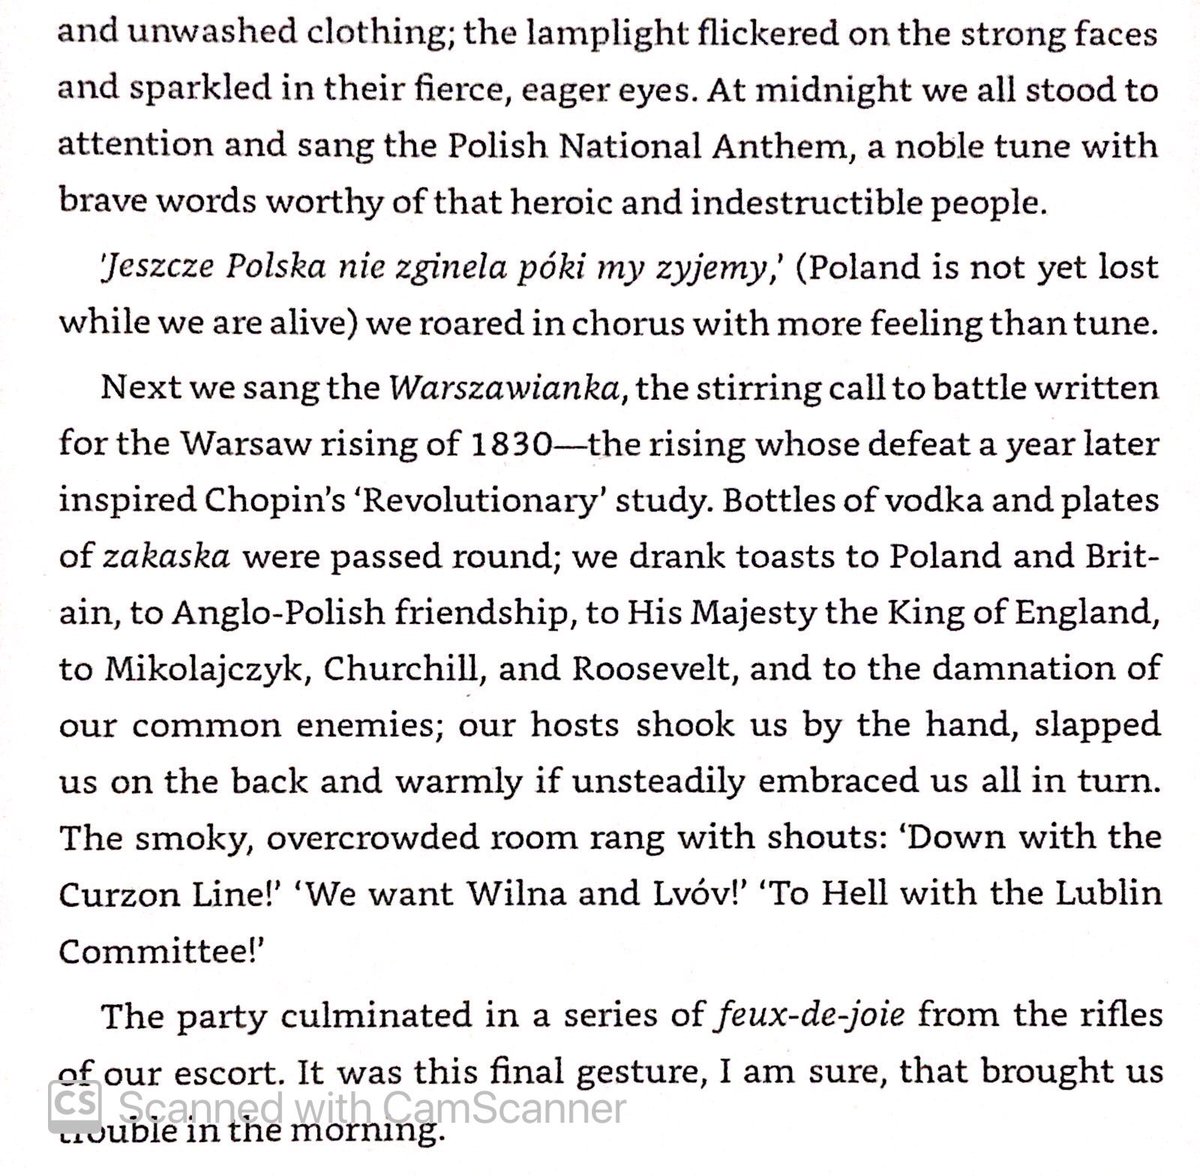 The Poles during WWII refused to accept that Vilnius & Lvov (ruled by Poland prior to the war) had been given to Lithuanians & Ukrainians respectively.